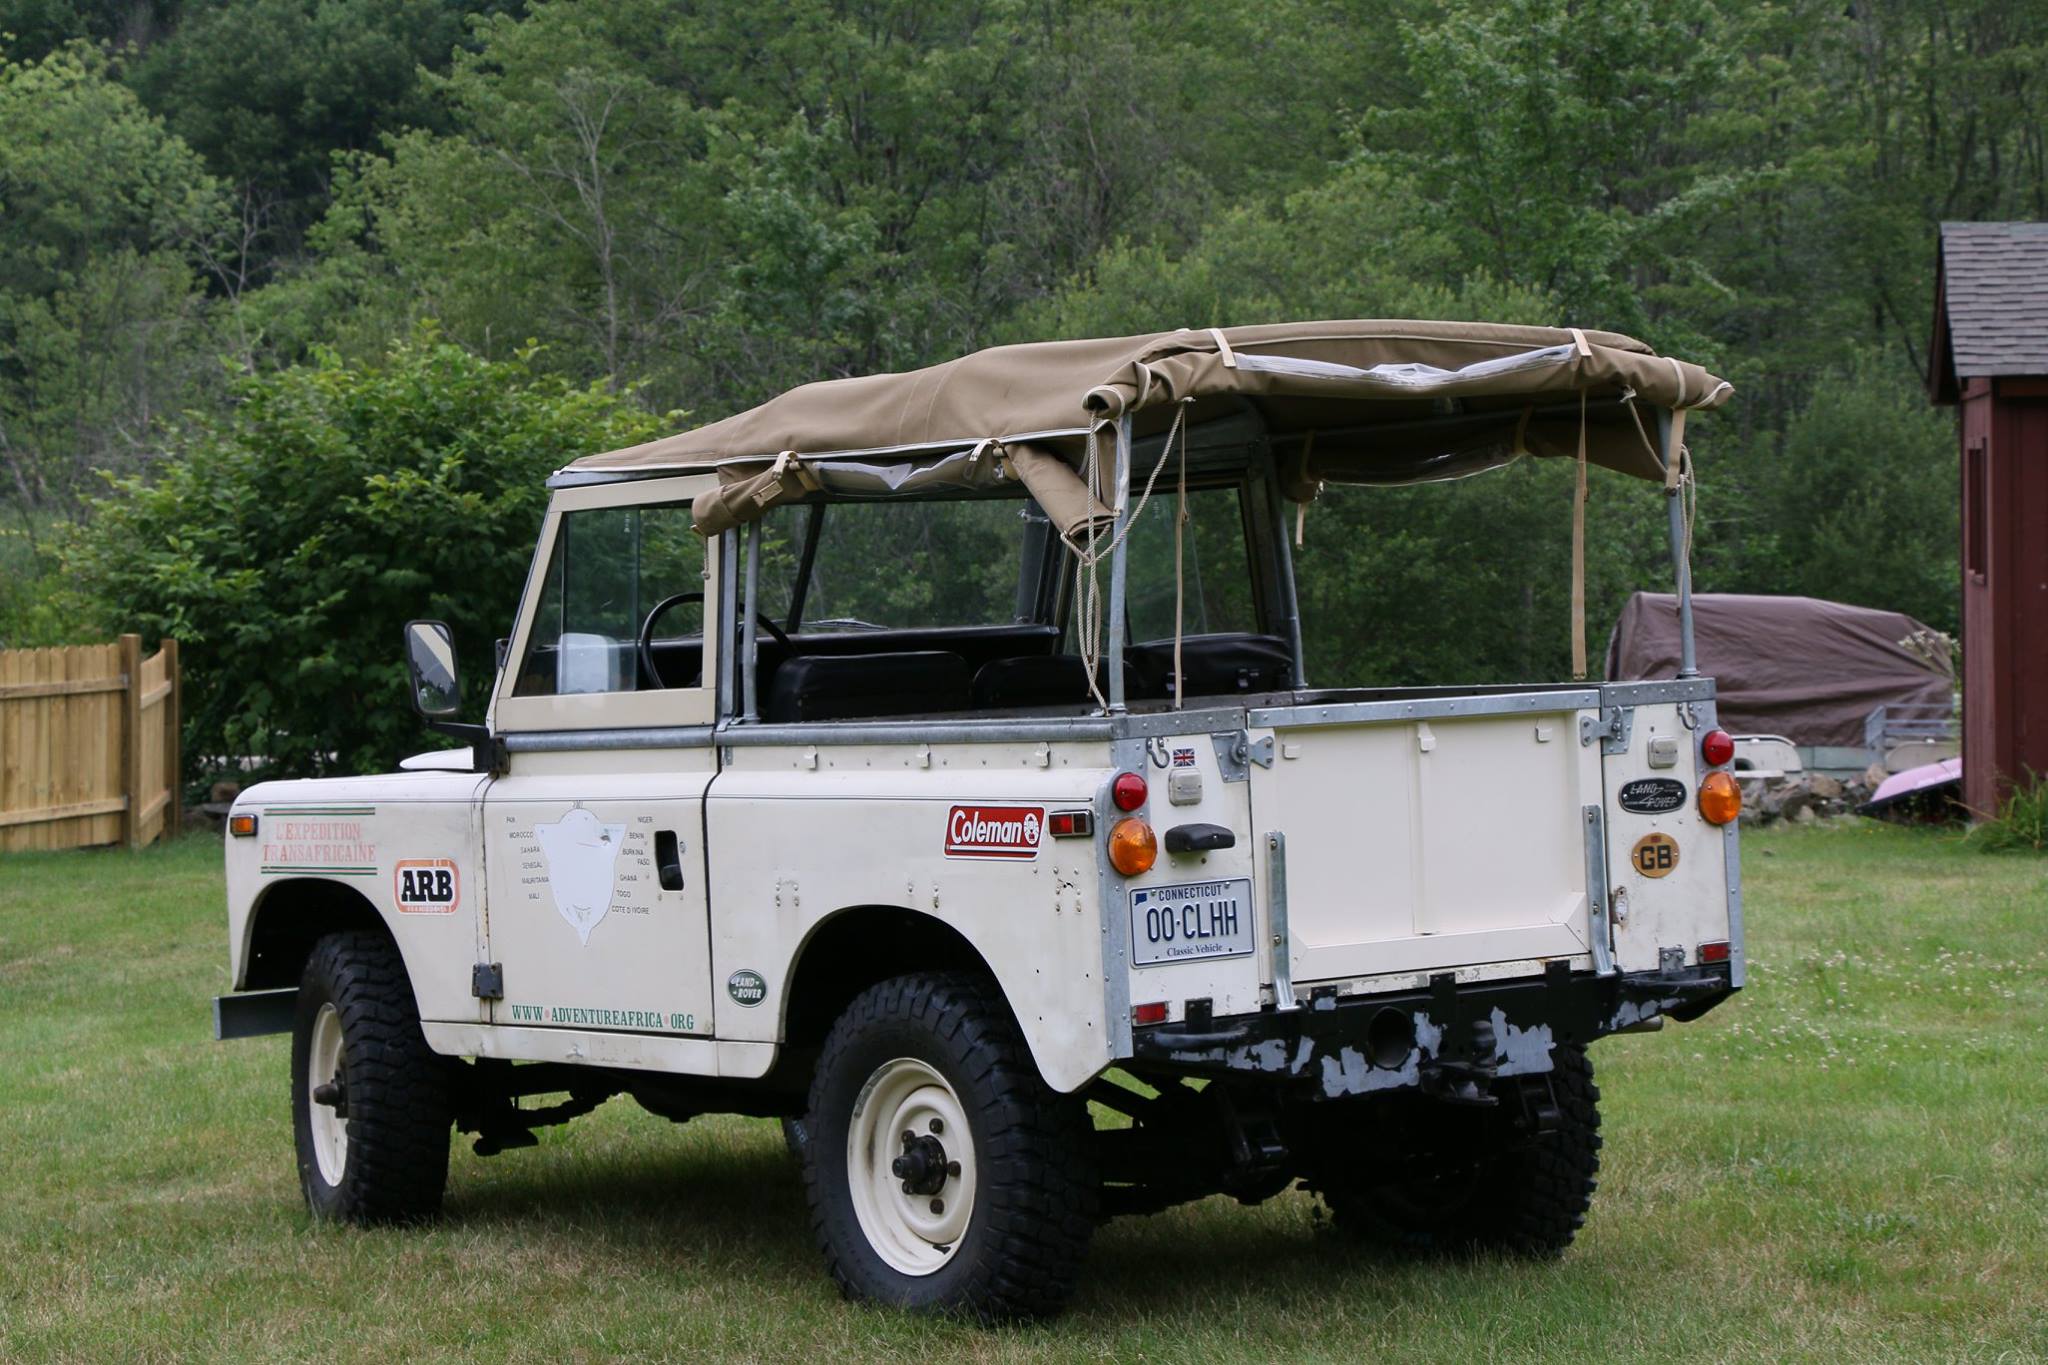 1973 Land Rover Series III L'Expedition Transafricaine